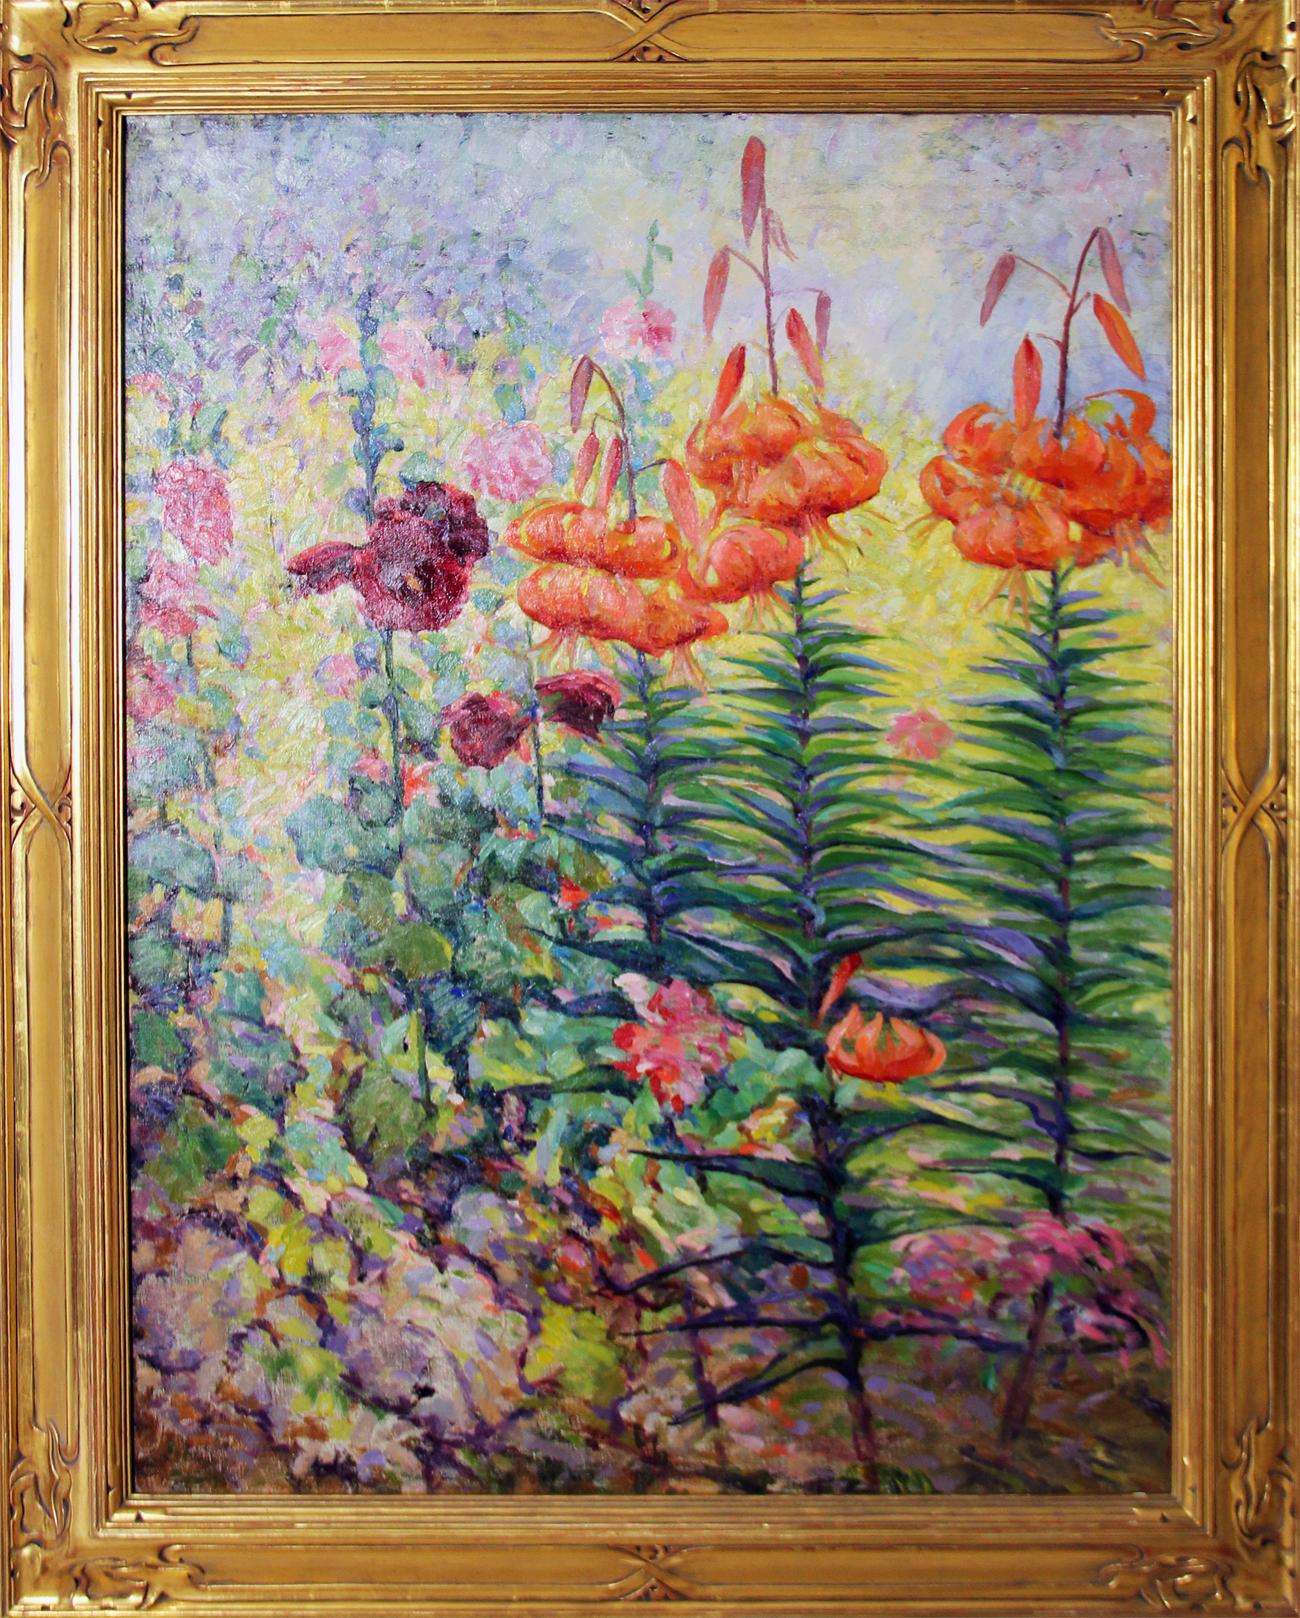 Henry Ryan MacGinnis Landscape Painting - Tiger Lillies, American Impressionist Floral Landscape, Oil on Canvas, Signed